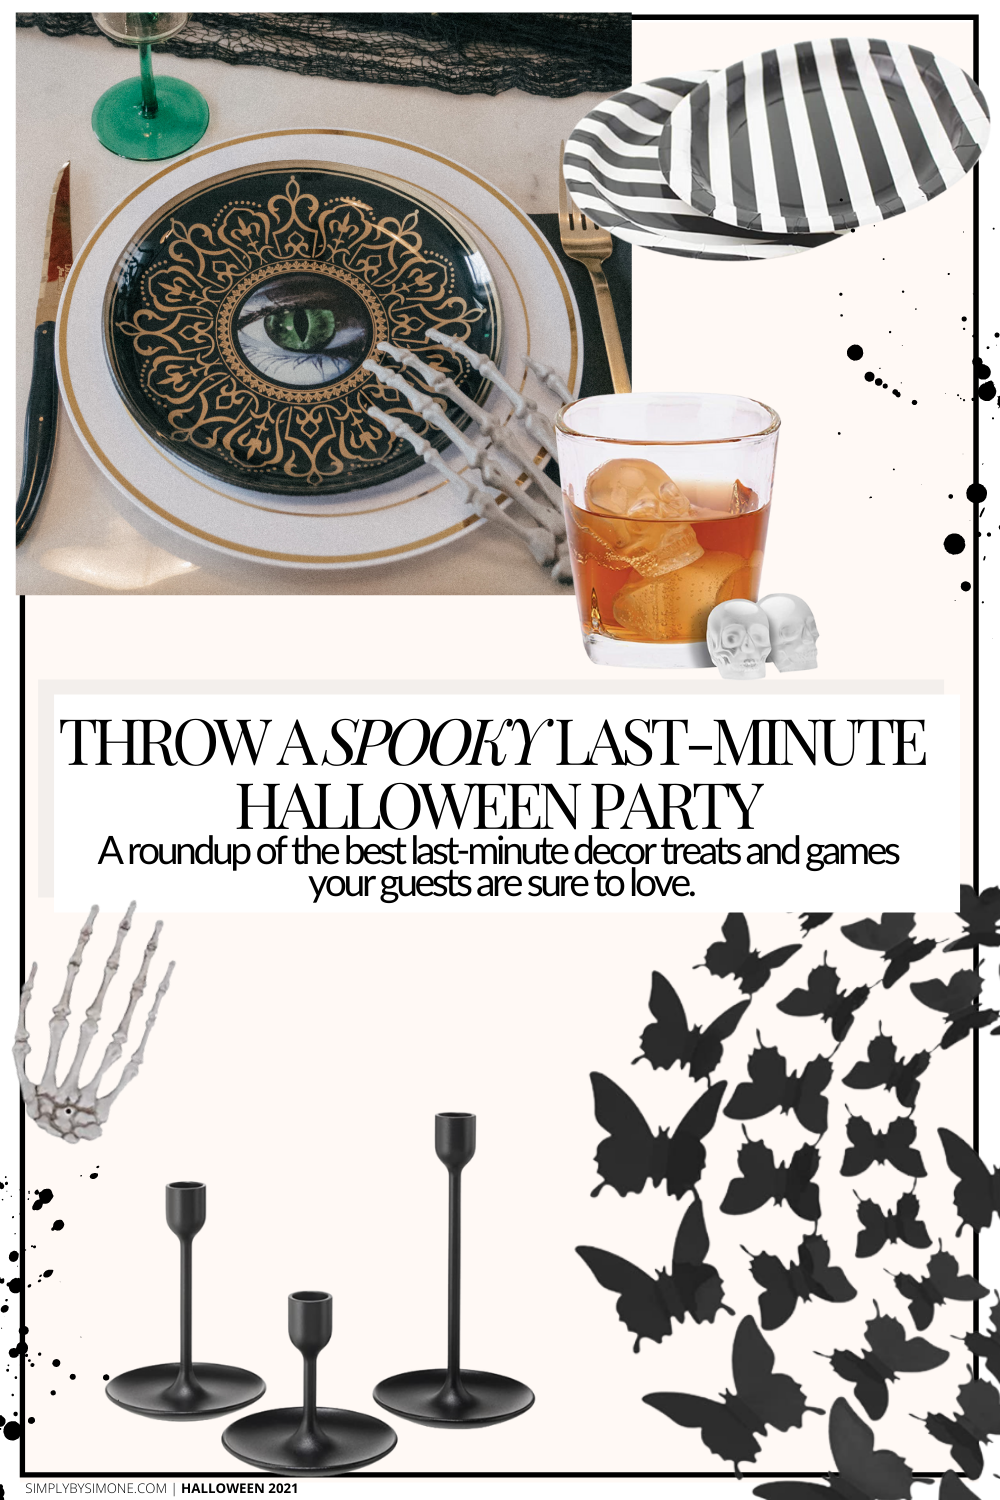 How To Throw A Spooky Last-Minute Halloween Party | Amazon Halloween Party Finds | Halloween Decor for a Last-Minute Party | Halloween Treats for a Last-Minute Halloween Party | Everything You Need to Throw A Halloween Party | Spooky Halloween Decorations | Graphic